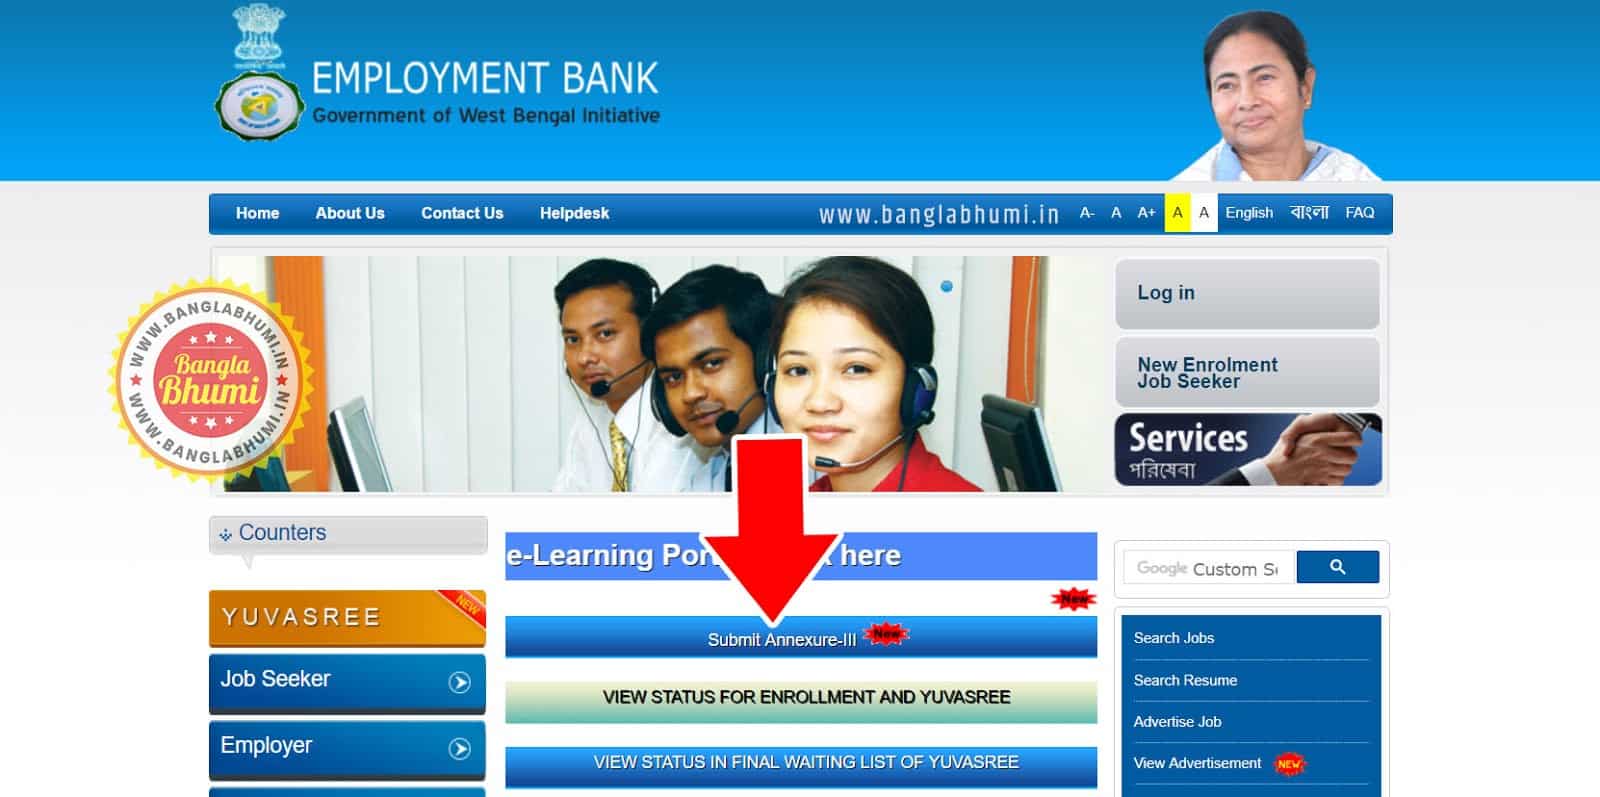 How to Update Annexure-III Employment Bank West Bengal - Step 1